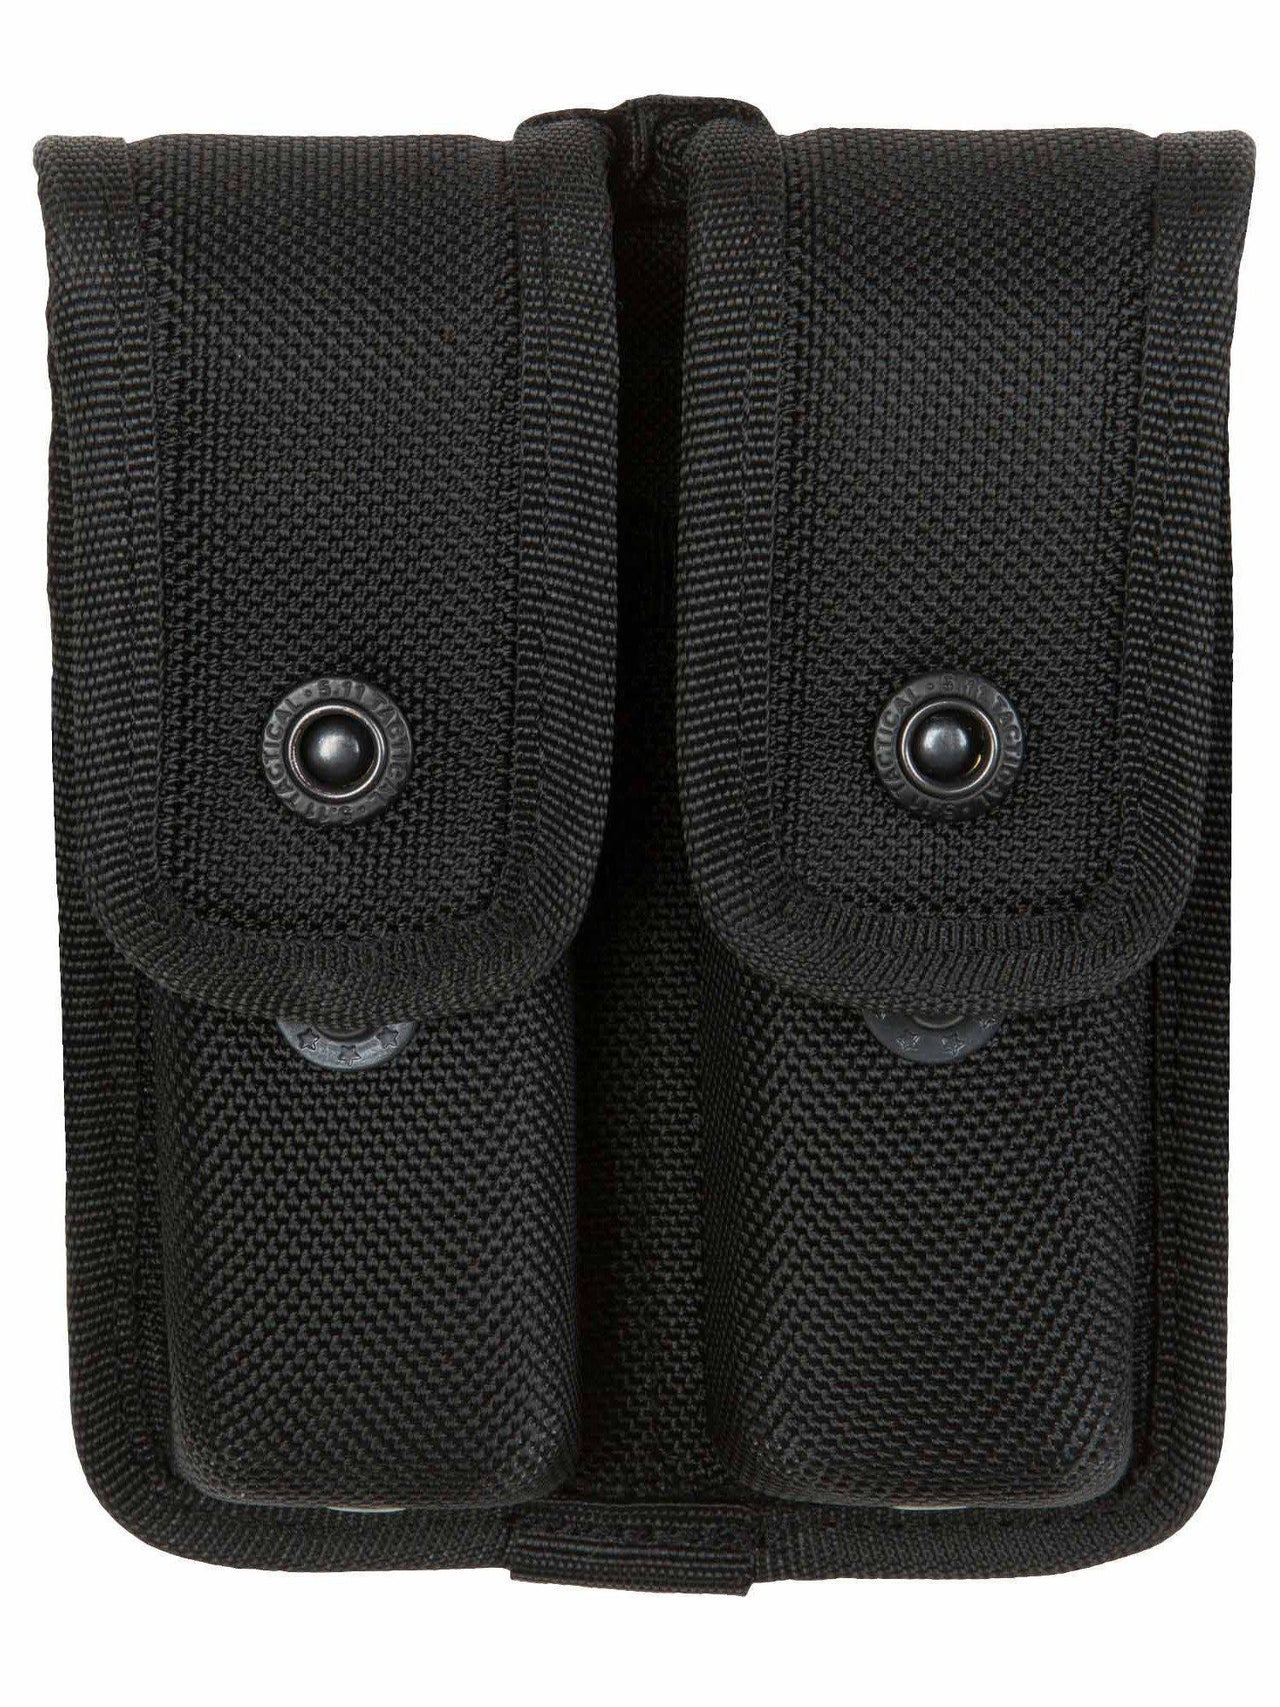 5.11 Tactical Sierra Bravo Double Mag Pouch - TacSource